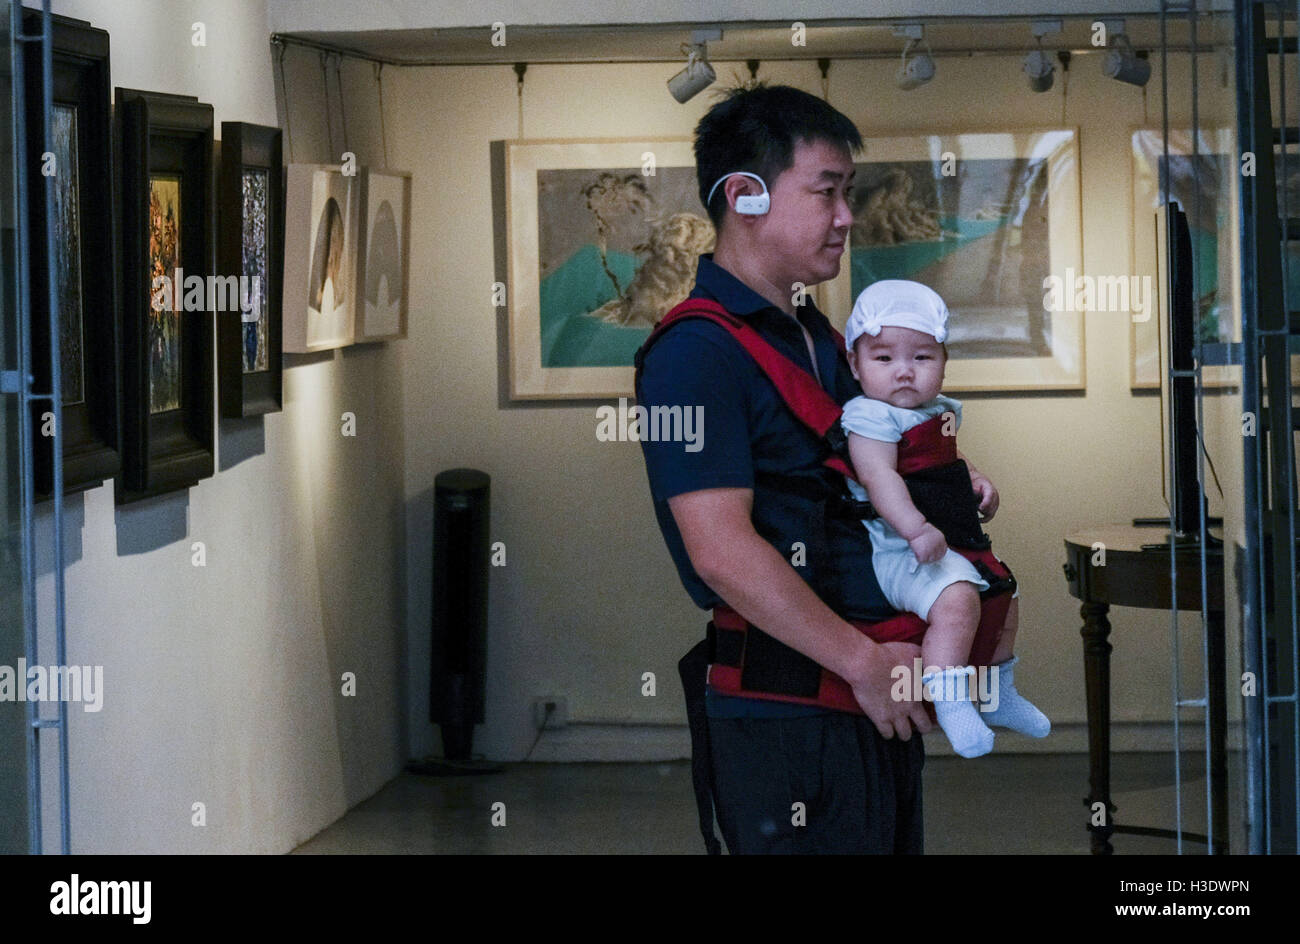 Los Angeles, California, USA. 10th Sep, 2016. A man carries a baby visits a gallery at the M50 Art Colony in Shanghai, China. Shanghai is the most populous city in China and the most populous city proper in the world. It is one of the four direct-controlled municipalities of China, with a population of more than 24 million as of 2014. It is a global financial centre, and a transport hub with the world's busiest container port. Located in the Yangtze River Delta in East China, Shanghai sits on the south edge of the mouth of the Yangtze in the middle portion of the Chinese coast. The munic Stock Photo